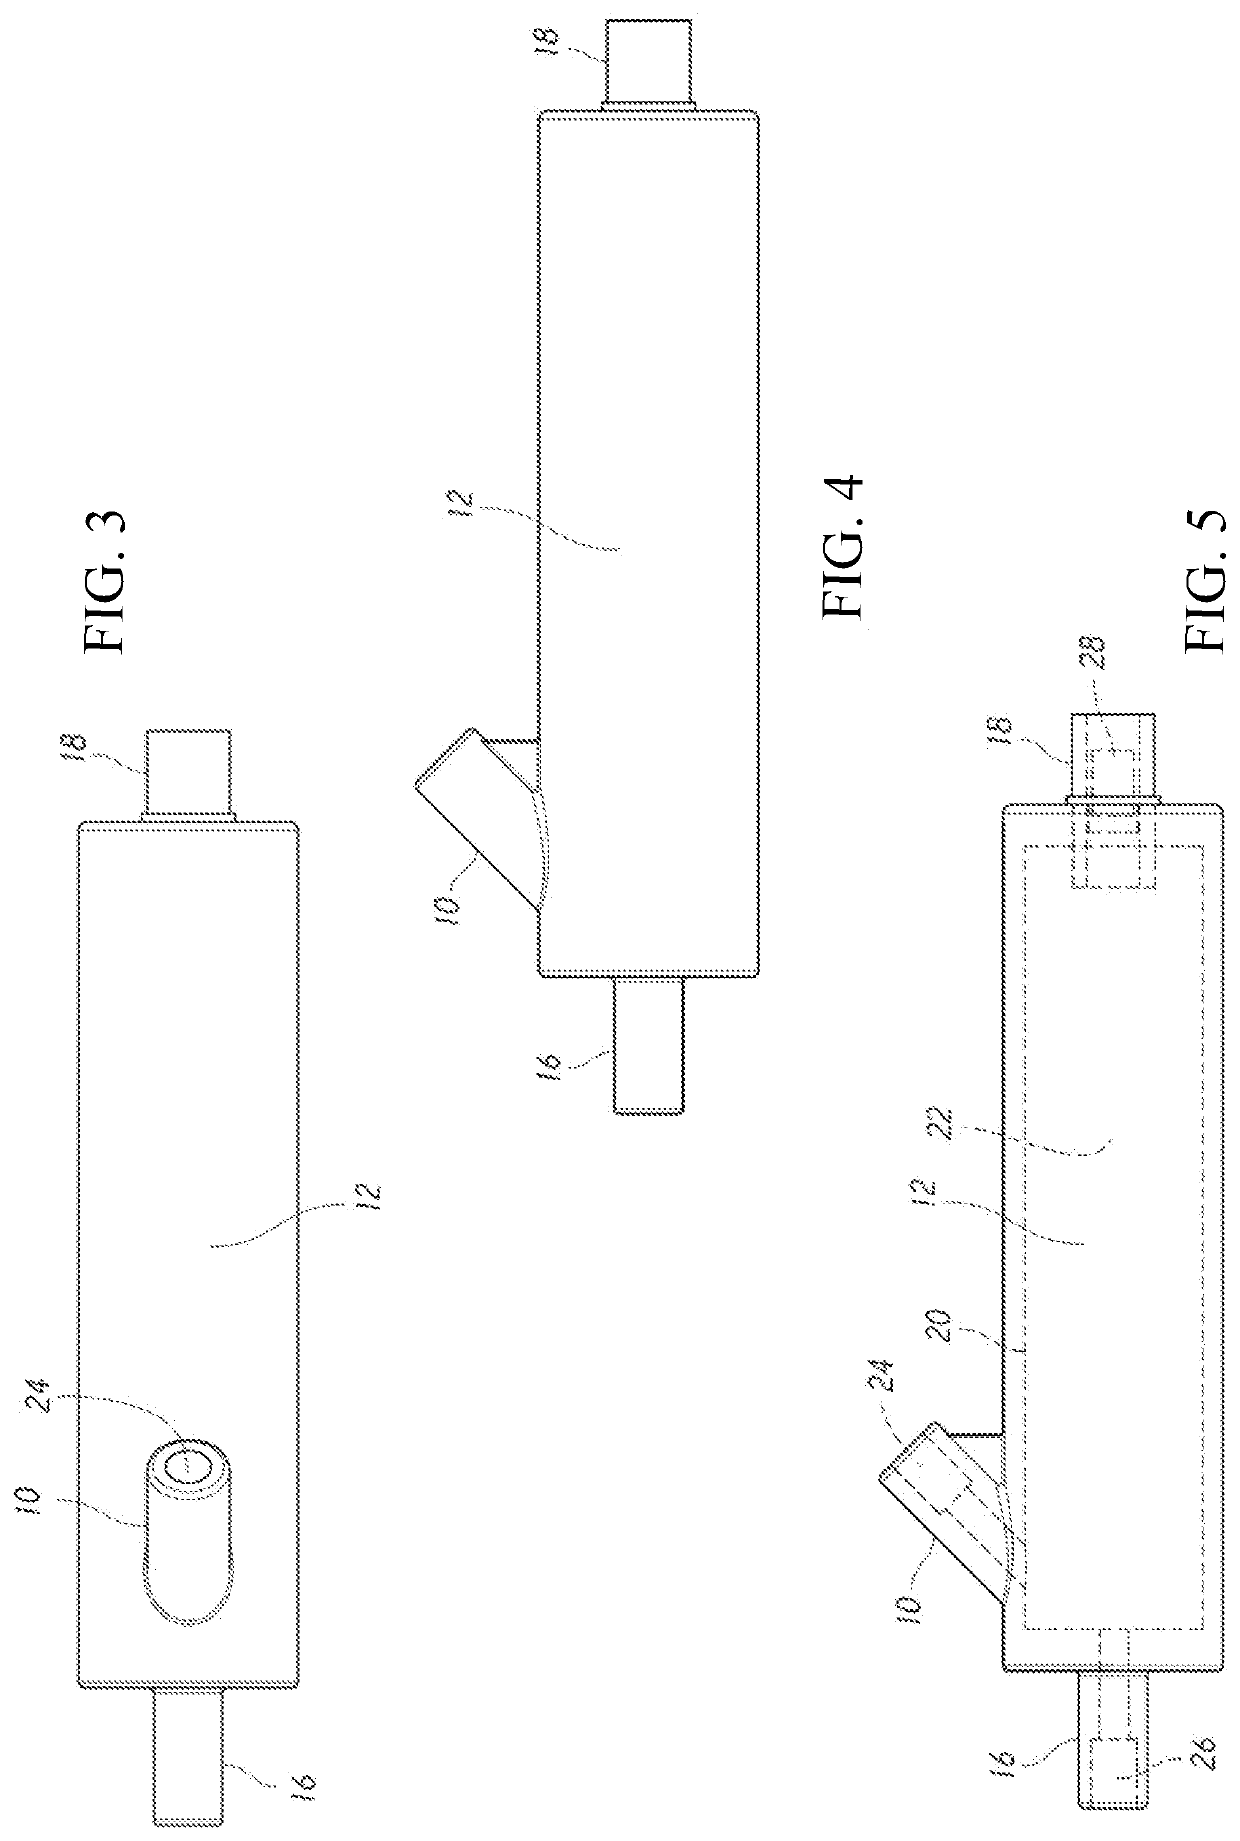 Gas removal apparatus and related methods